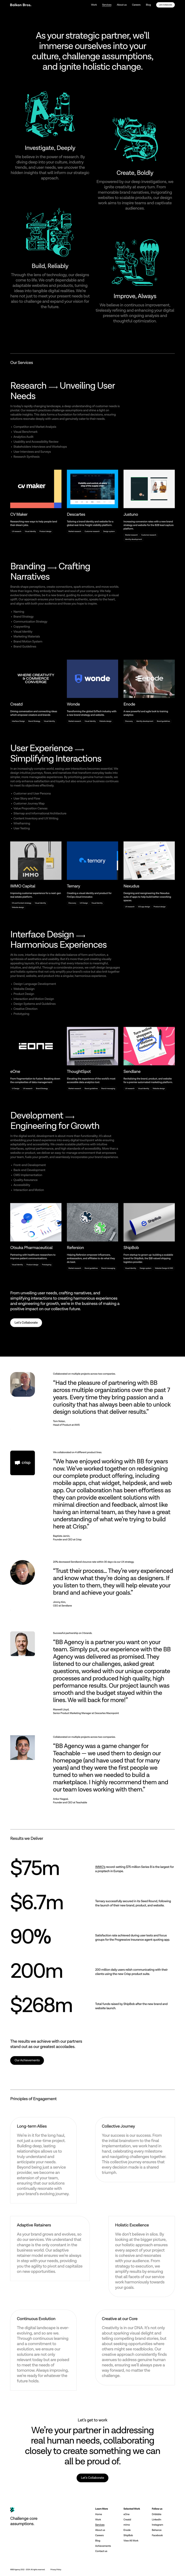 BB Agency Landing Page Example: BB Agency is a strategic partner for fast-growing companies in need of a scalable website with modular CMS, design system, and brand identity. We are a partner for digital evolution, merging creativity and technology for holistic growth.